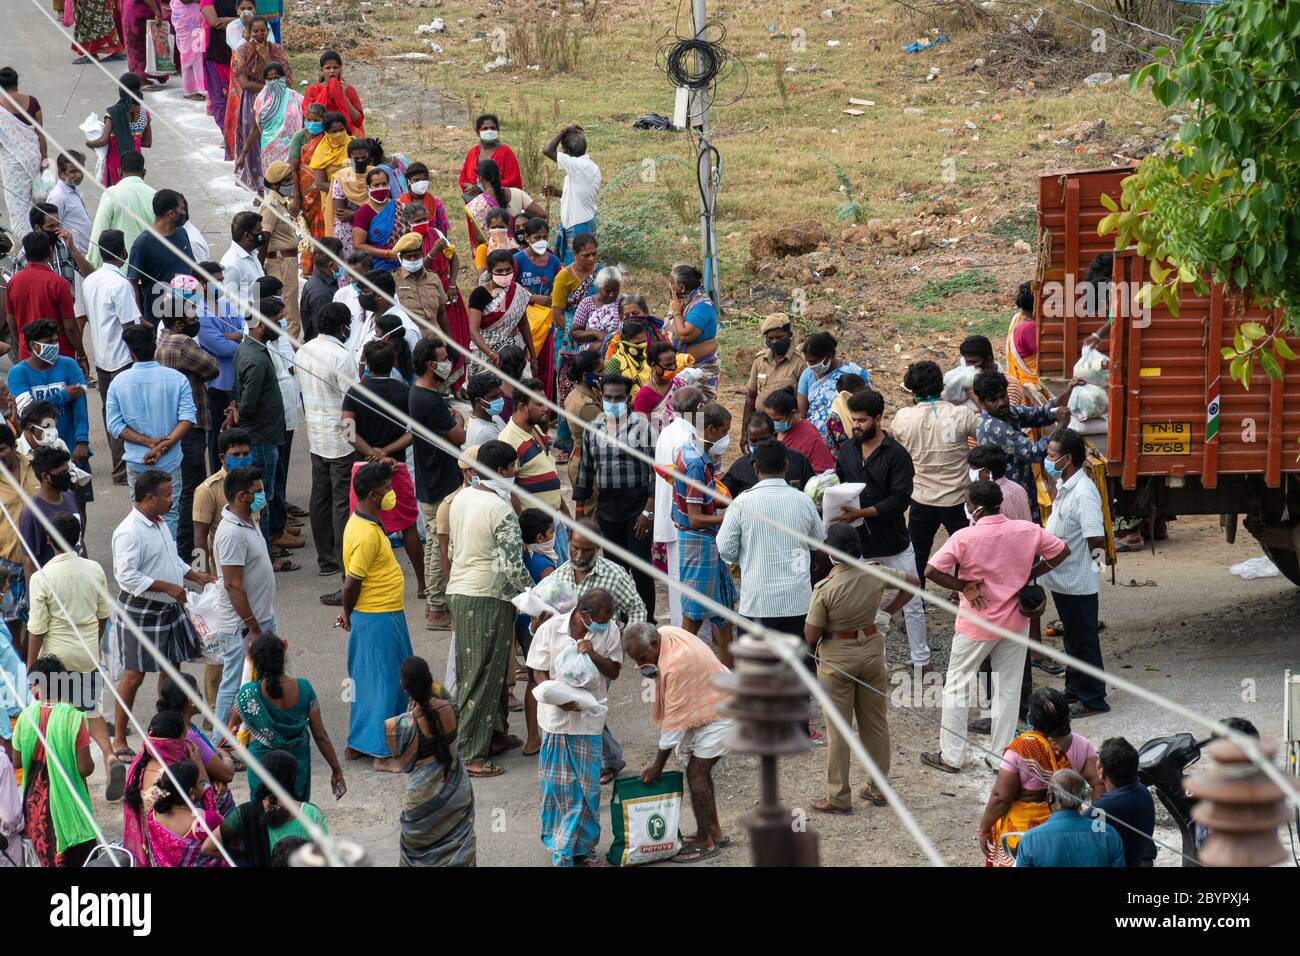 A group of people gather to receive free groceries and rice despite concerns about the spread of COVID-19. The crowd is watched by police, yet some pe Stock Photo